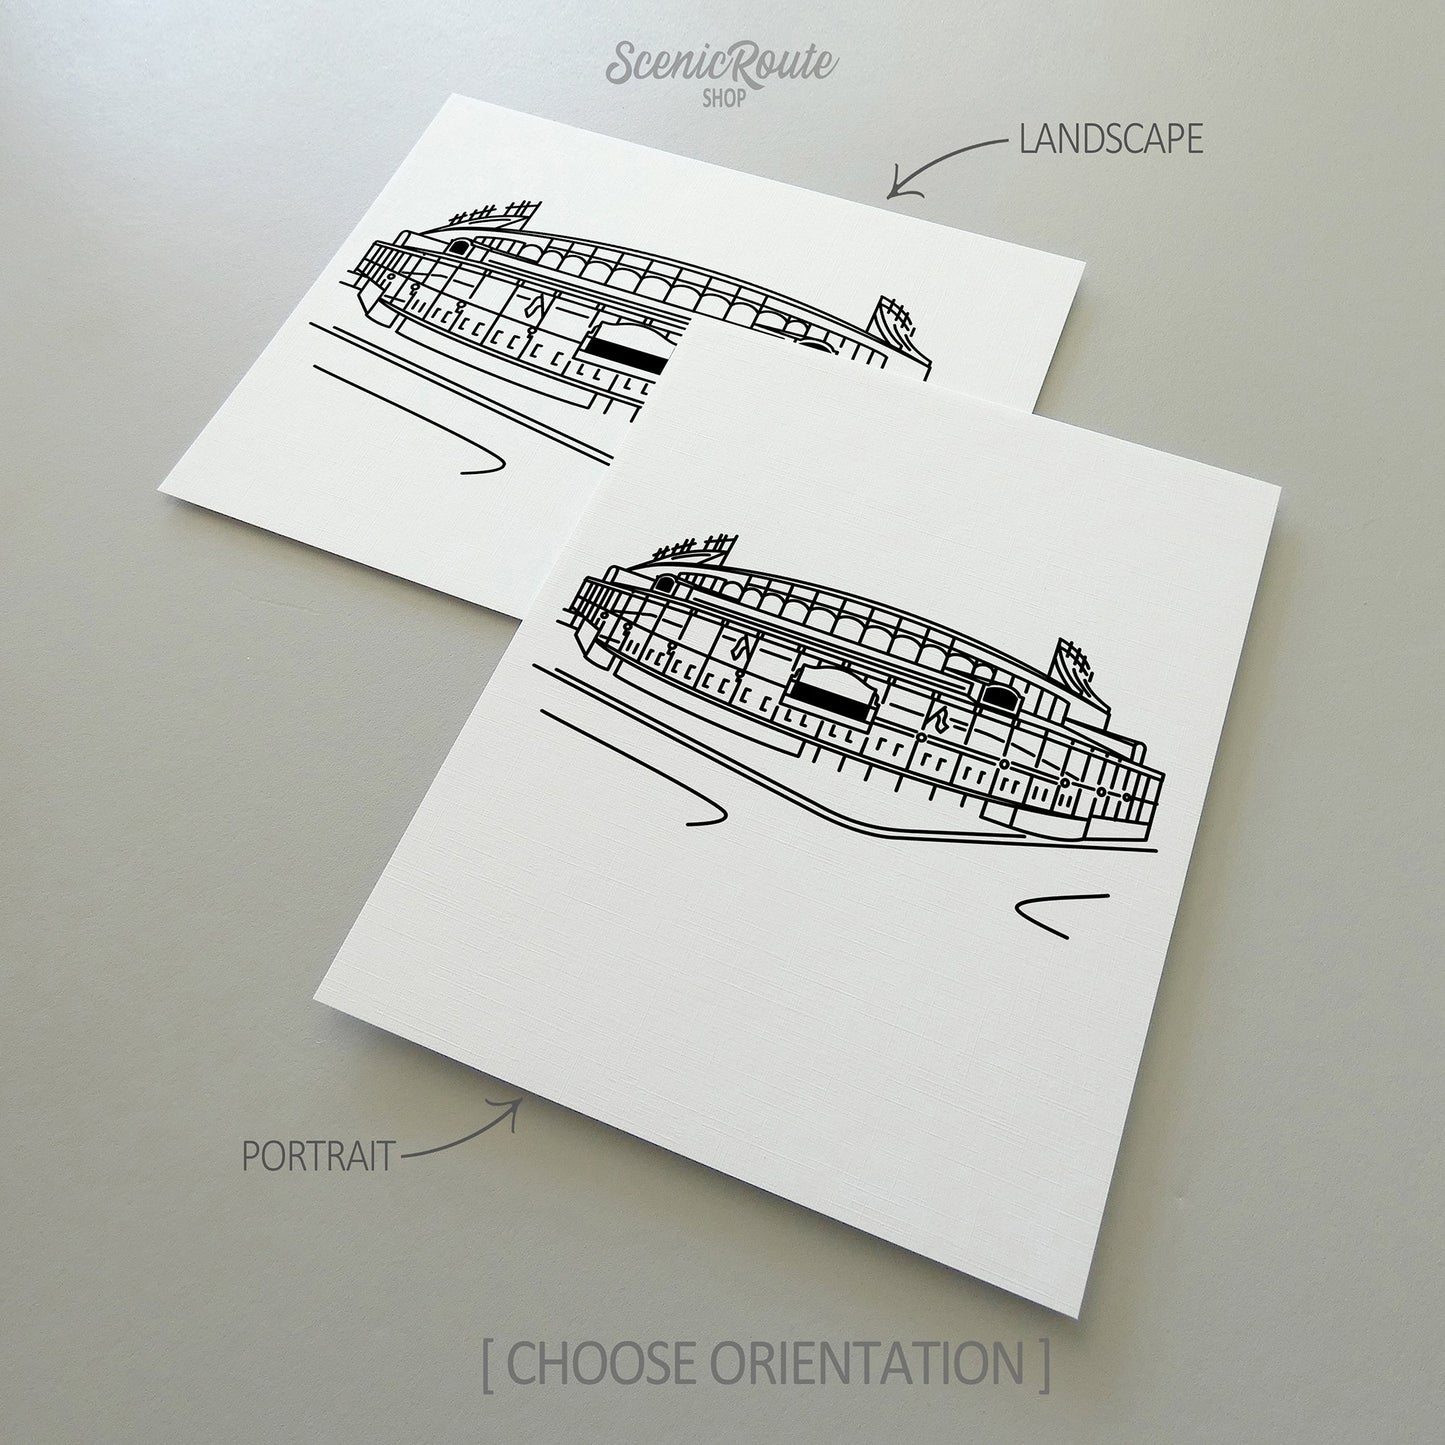 Two line art drawings of Wrigley Field on white linen paper with a gray background.  The pieces are shown in portrait and landscape orientation for the available art print options.